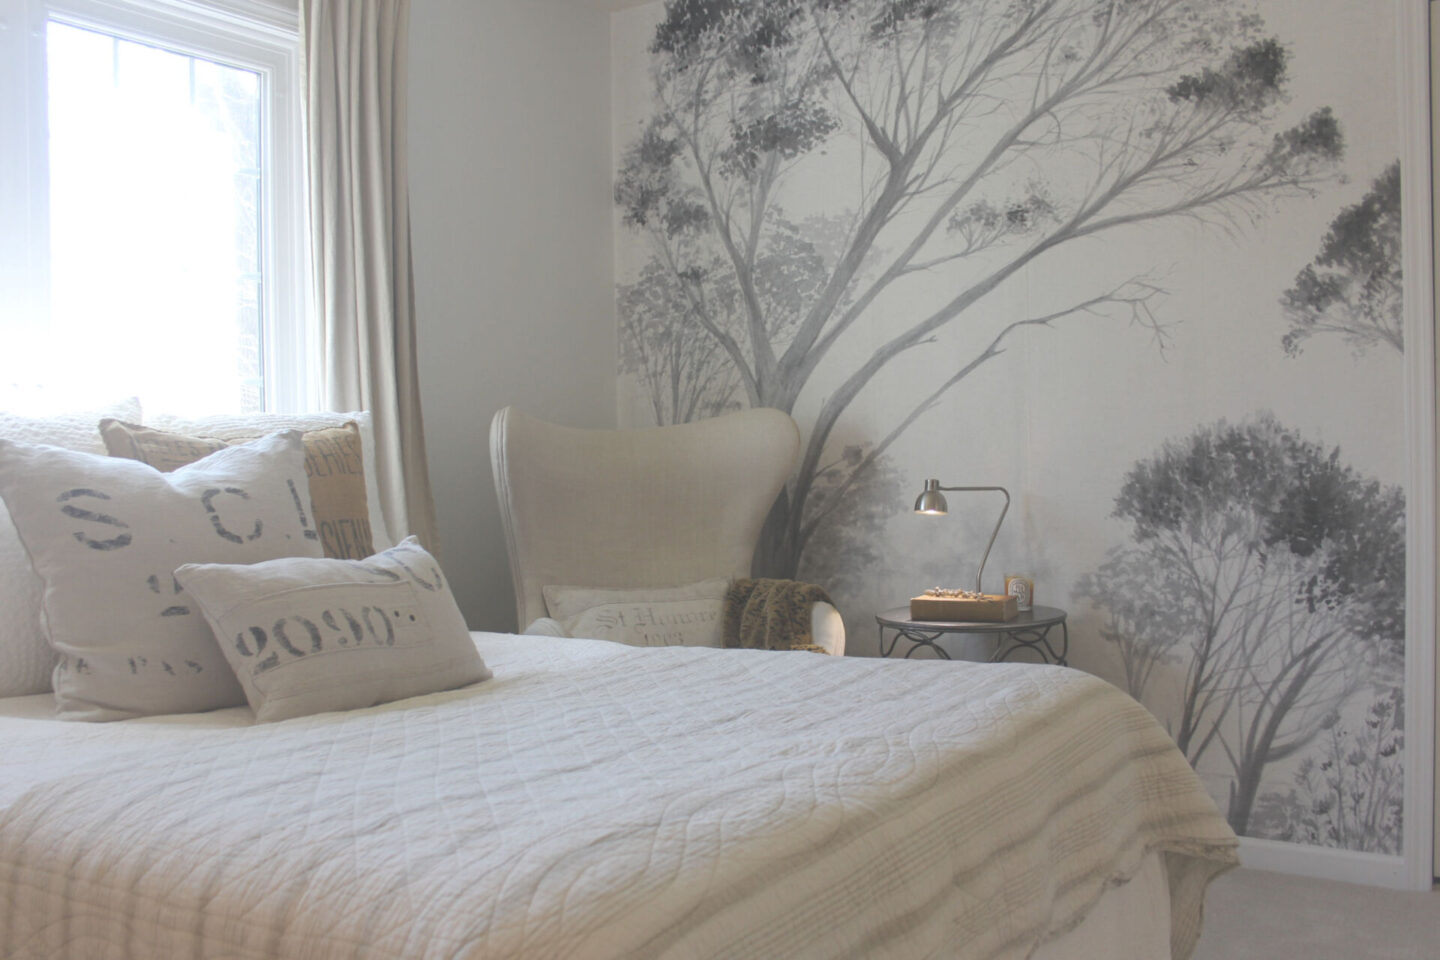 Subdued, understated, and serene, a tone on tone wall covering with gray trees sets a calm tone in a bedroom - Hello Lovely Studio. #wallcovering #photowall #treewallpaper #hellolovelystudio